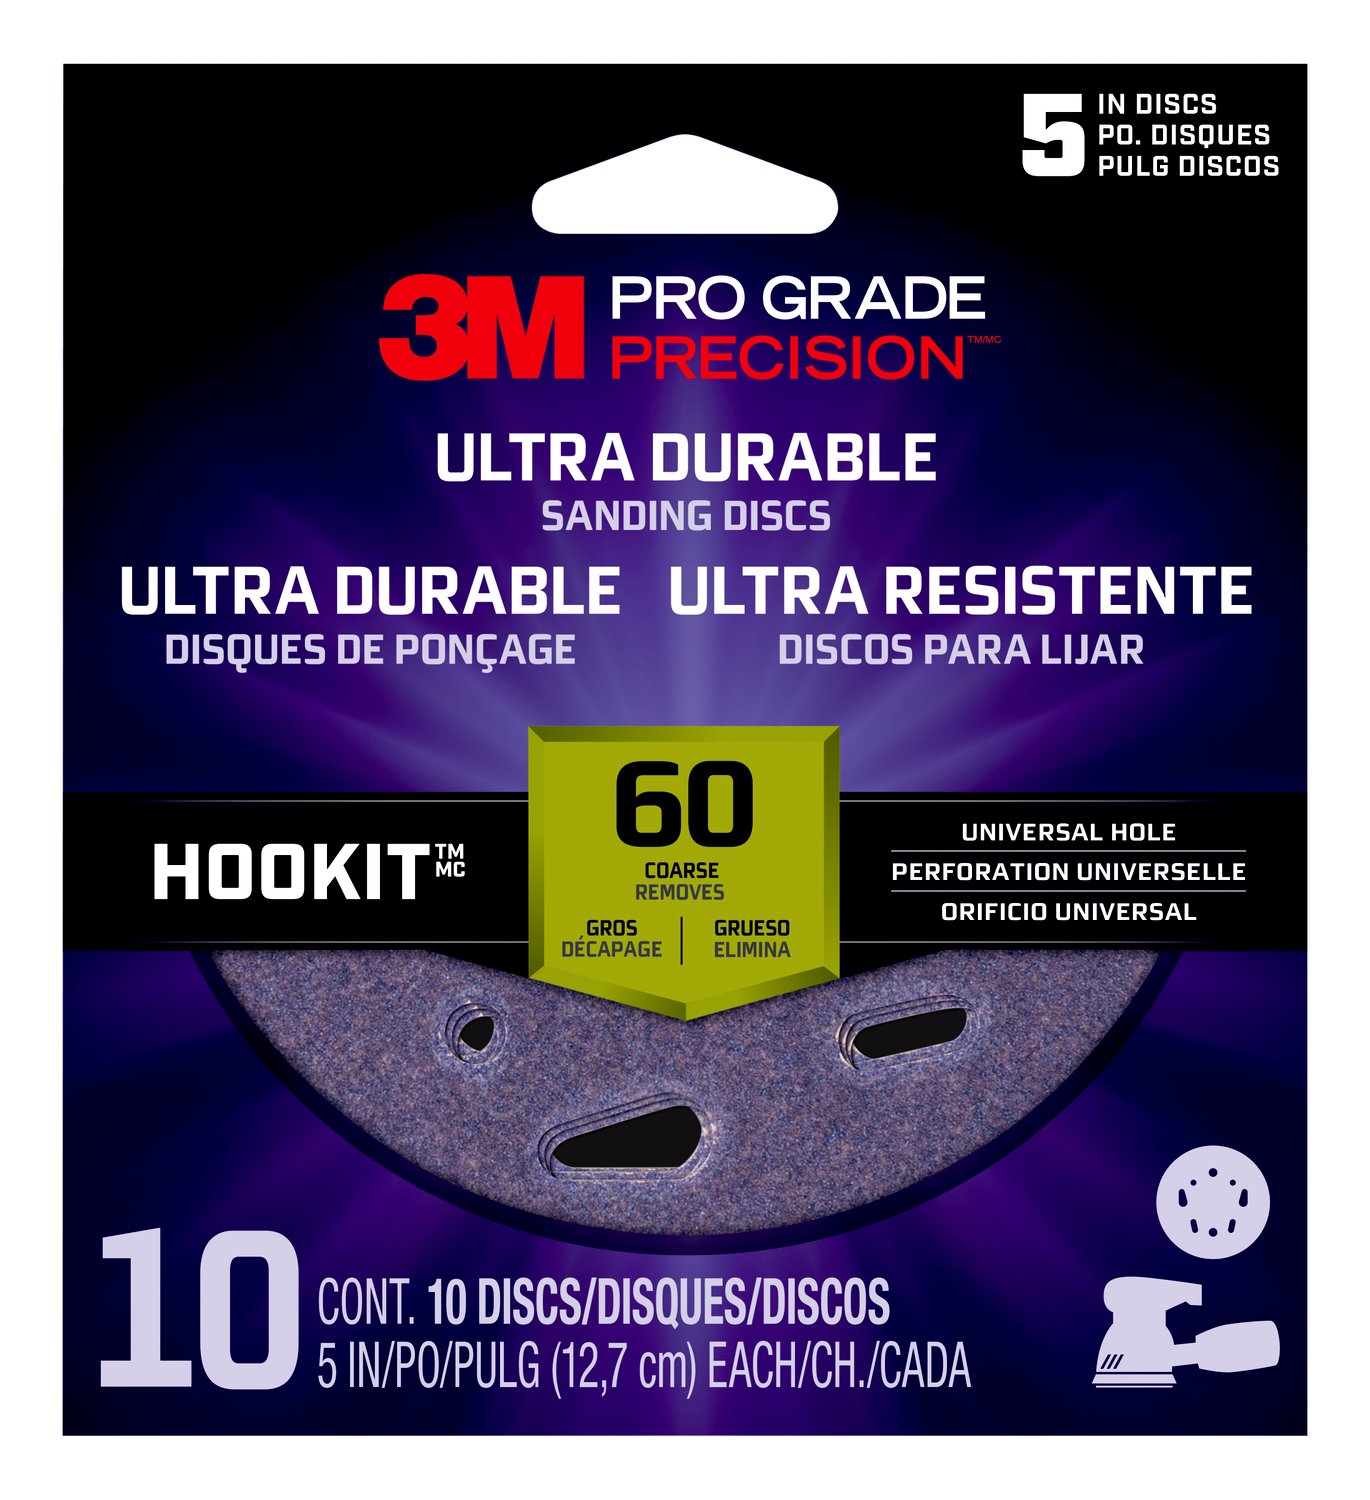 7100202913 - 3M Pro Grade Precision Ultra Durable Universal Hole Sanding Disc,
DUH560TRI-10T, 5 IN x UH, 60, 10 pack